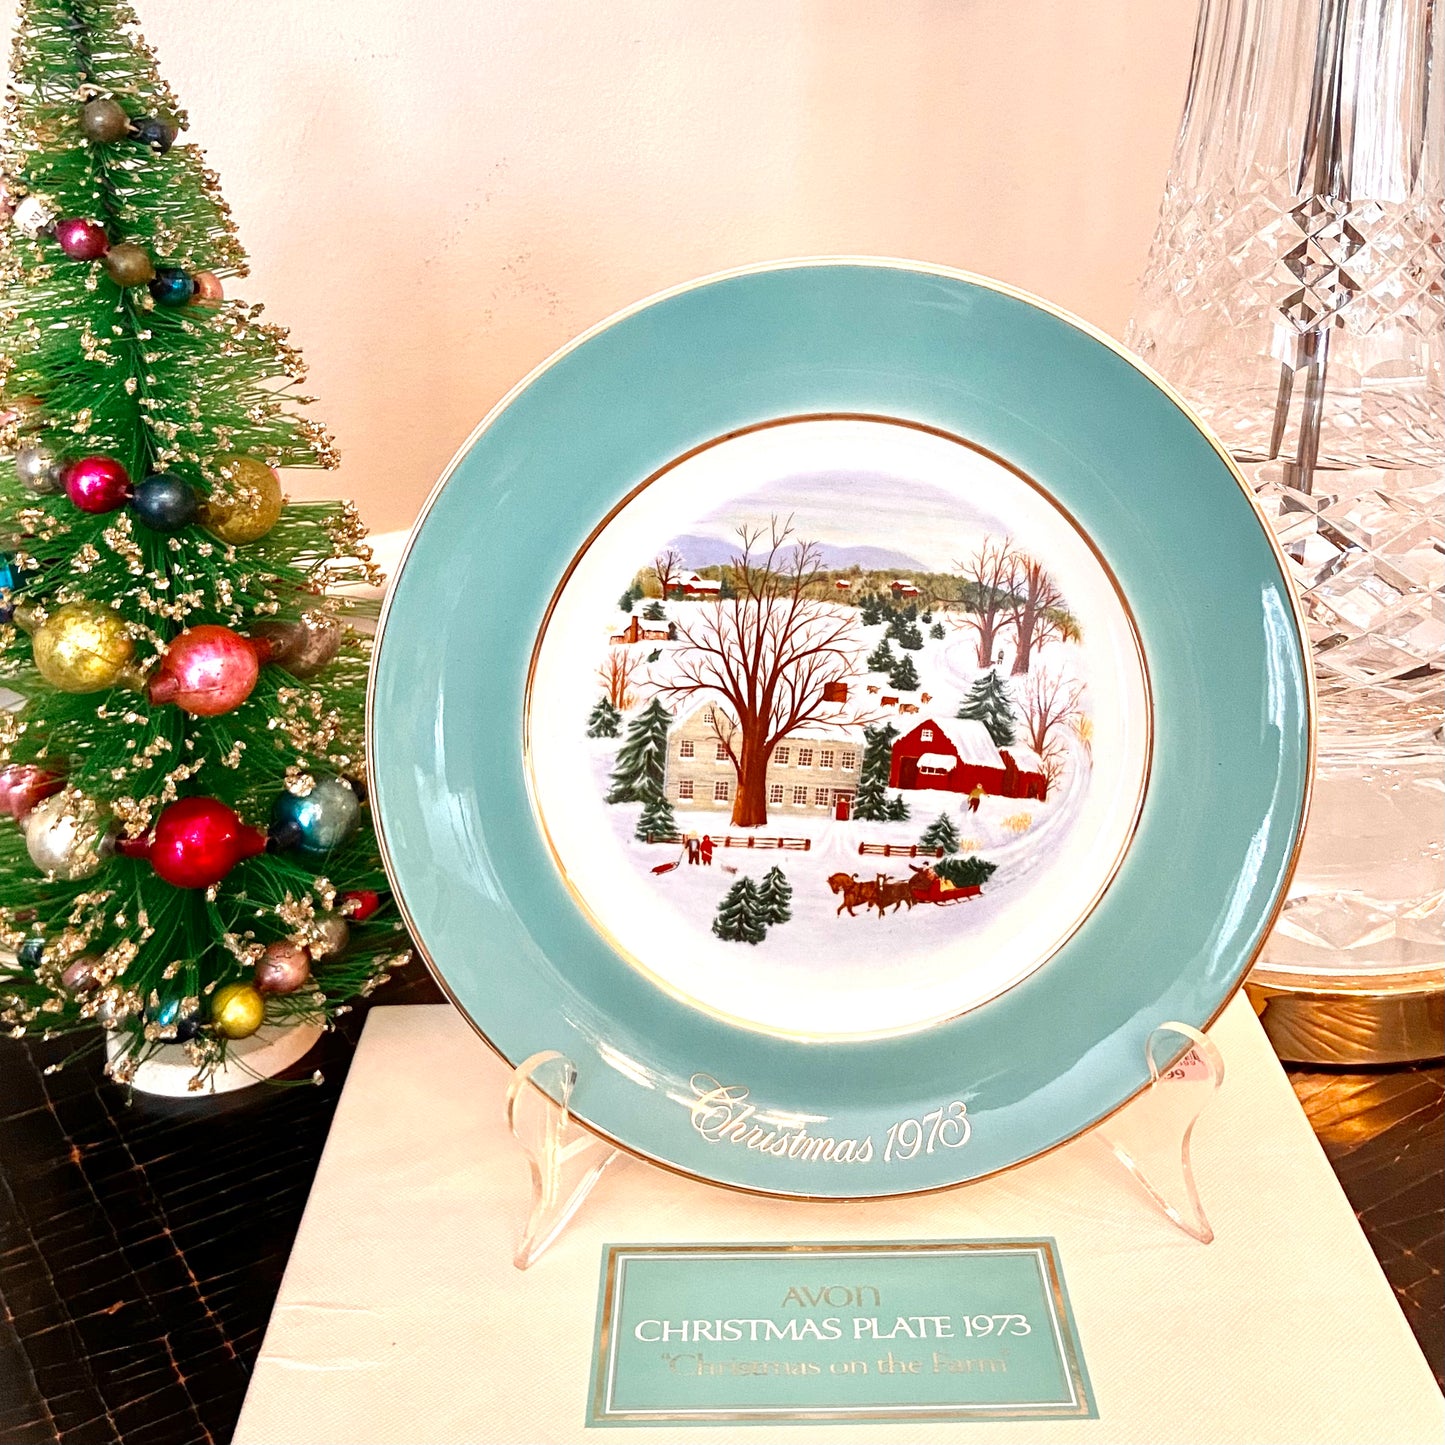 Vintage Endcot Wedgwood stamped Christmas plate circa 1973 in box